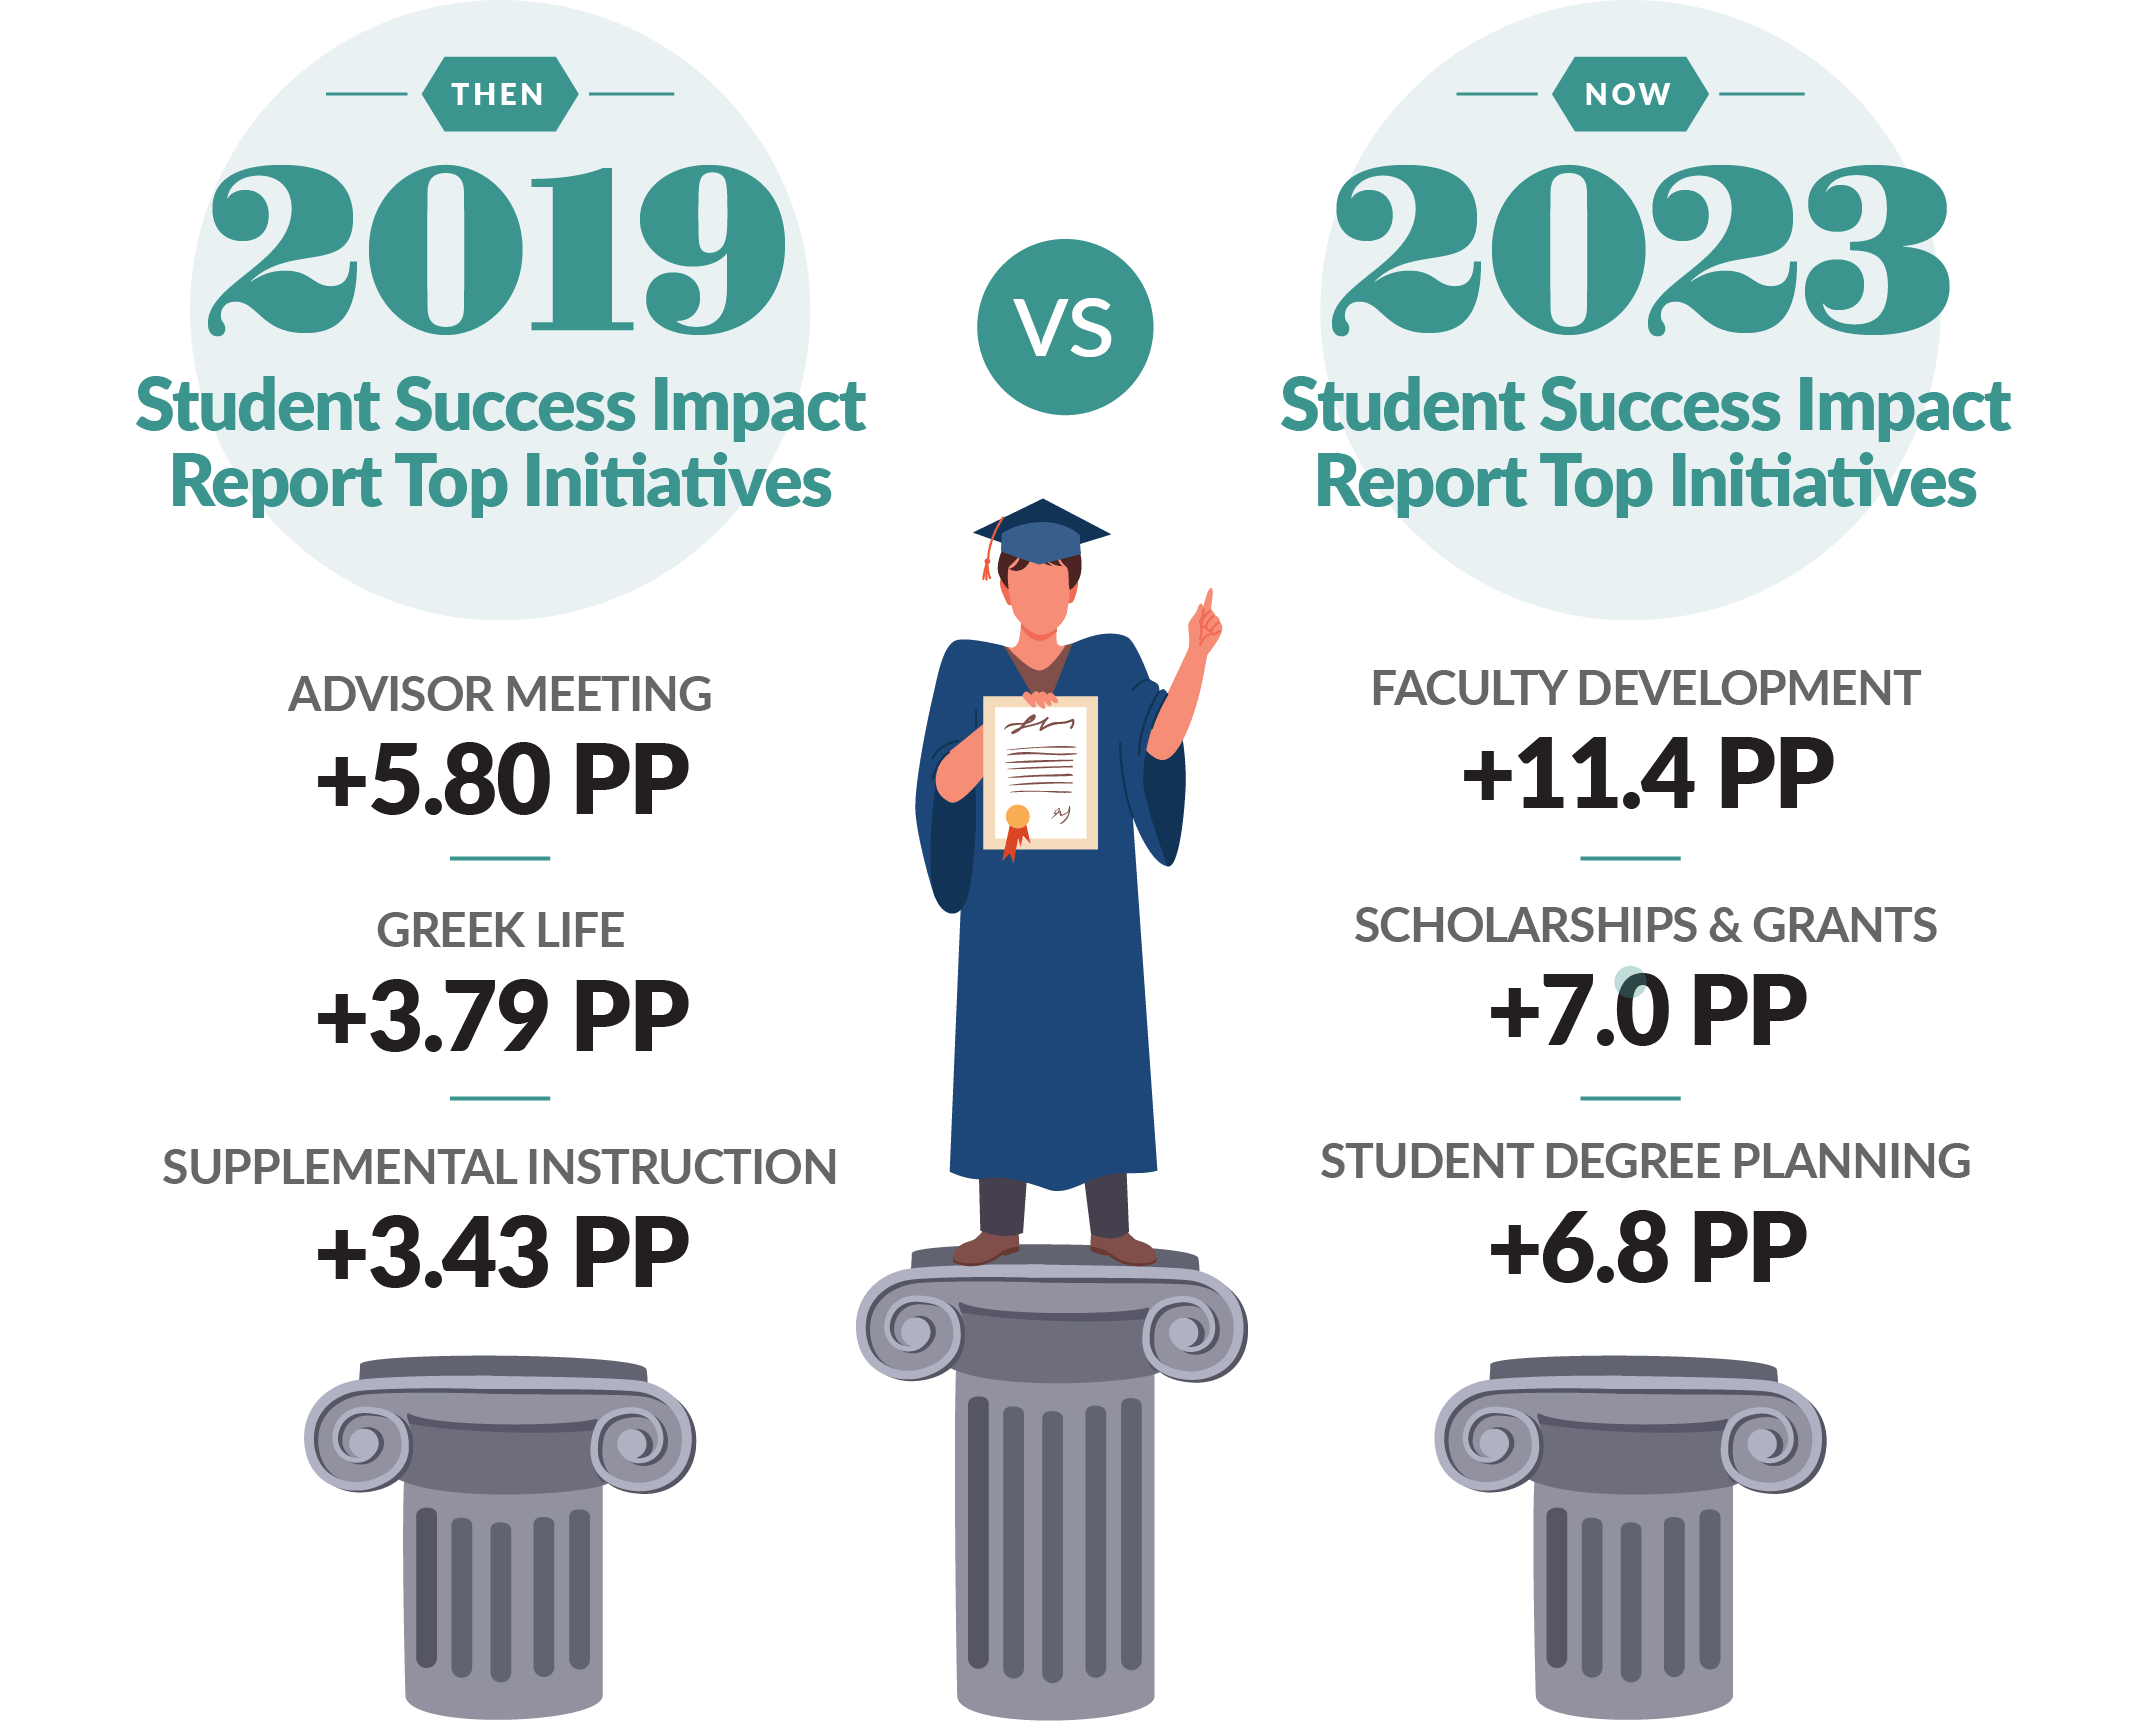 Infographic comparing 2019 and 2023 Student Success Impact Report Top Initiatives